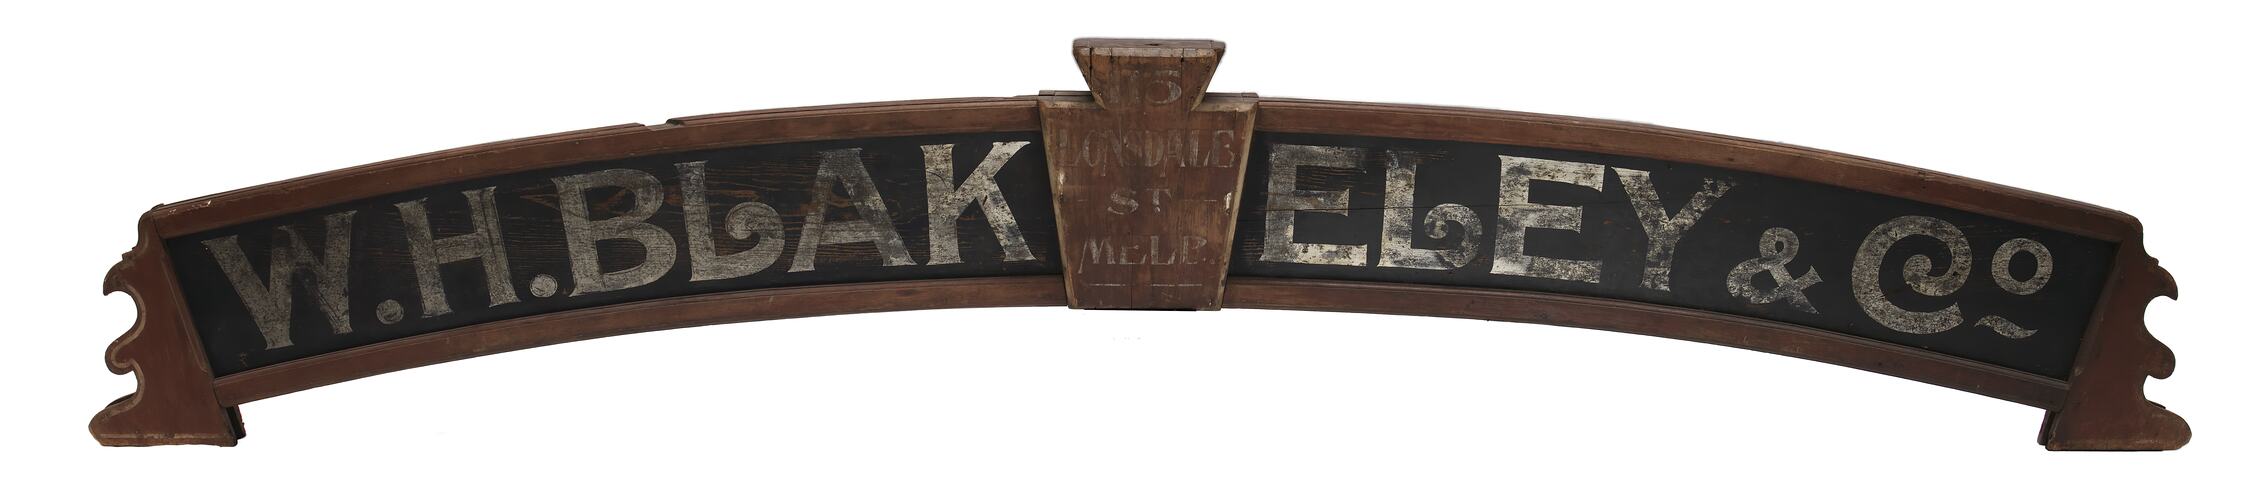 Sign - WH Blakeley & Co, Melbourne, 1884